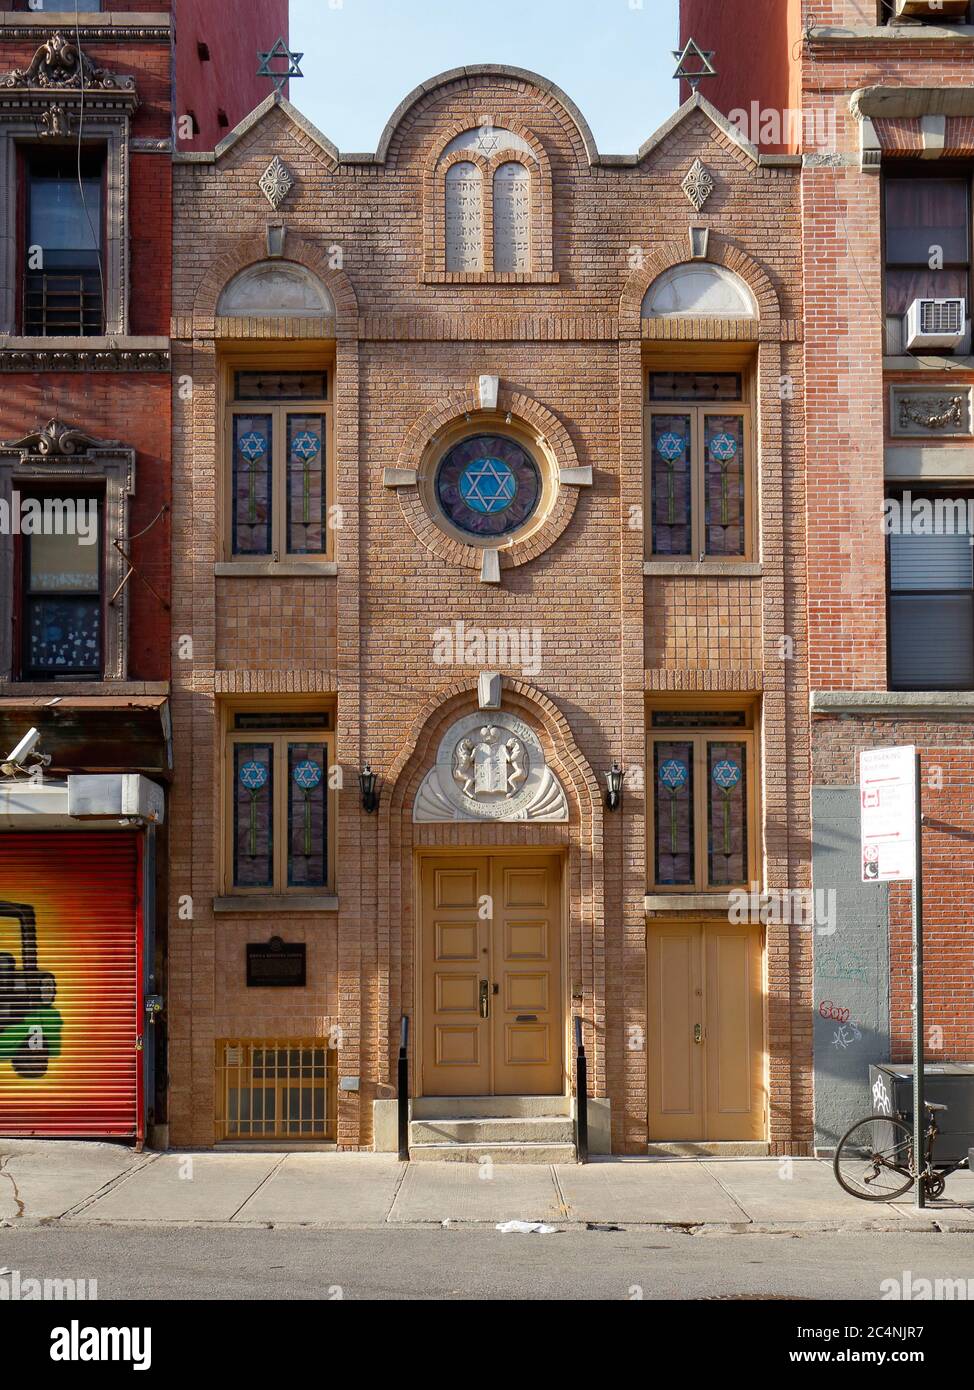 Kehila Kedosha Janina, 280 Broome Street, New York, NY. exterior storefront of a Romaniote synagogue and museum in Manhattan's Lower East Side. Stock Photo